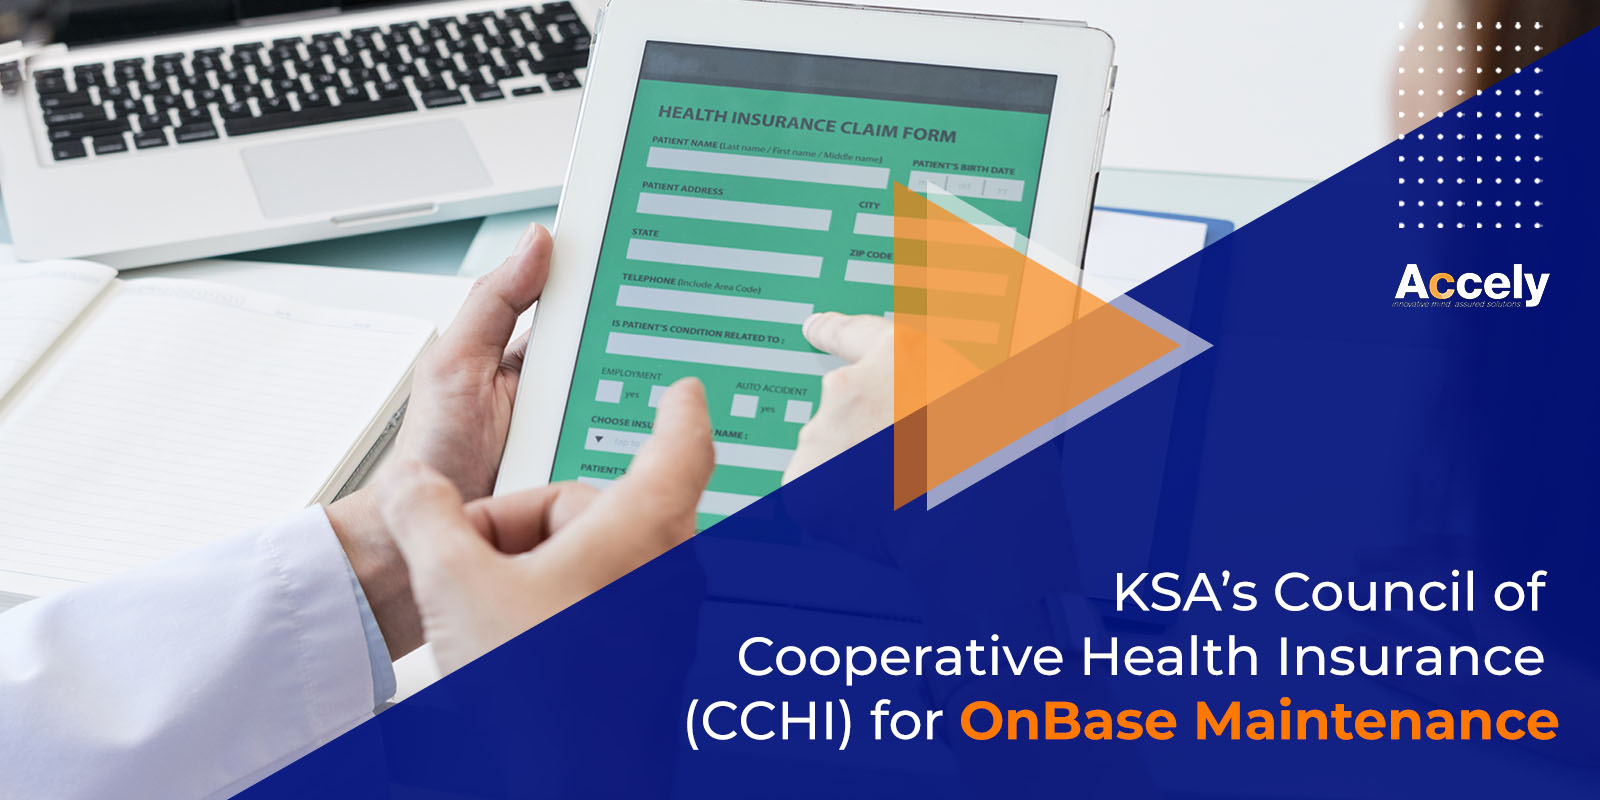 KSA’s Council of Cooperative Health Insurance (CCHI) for OnBase Maintenance